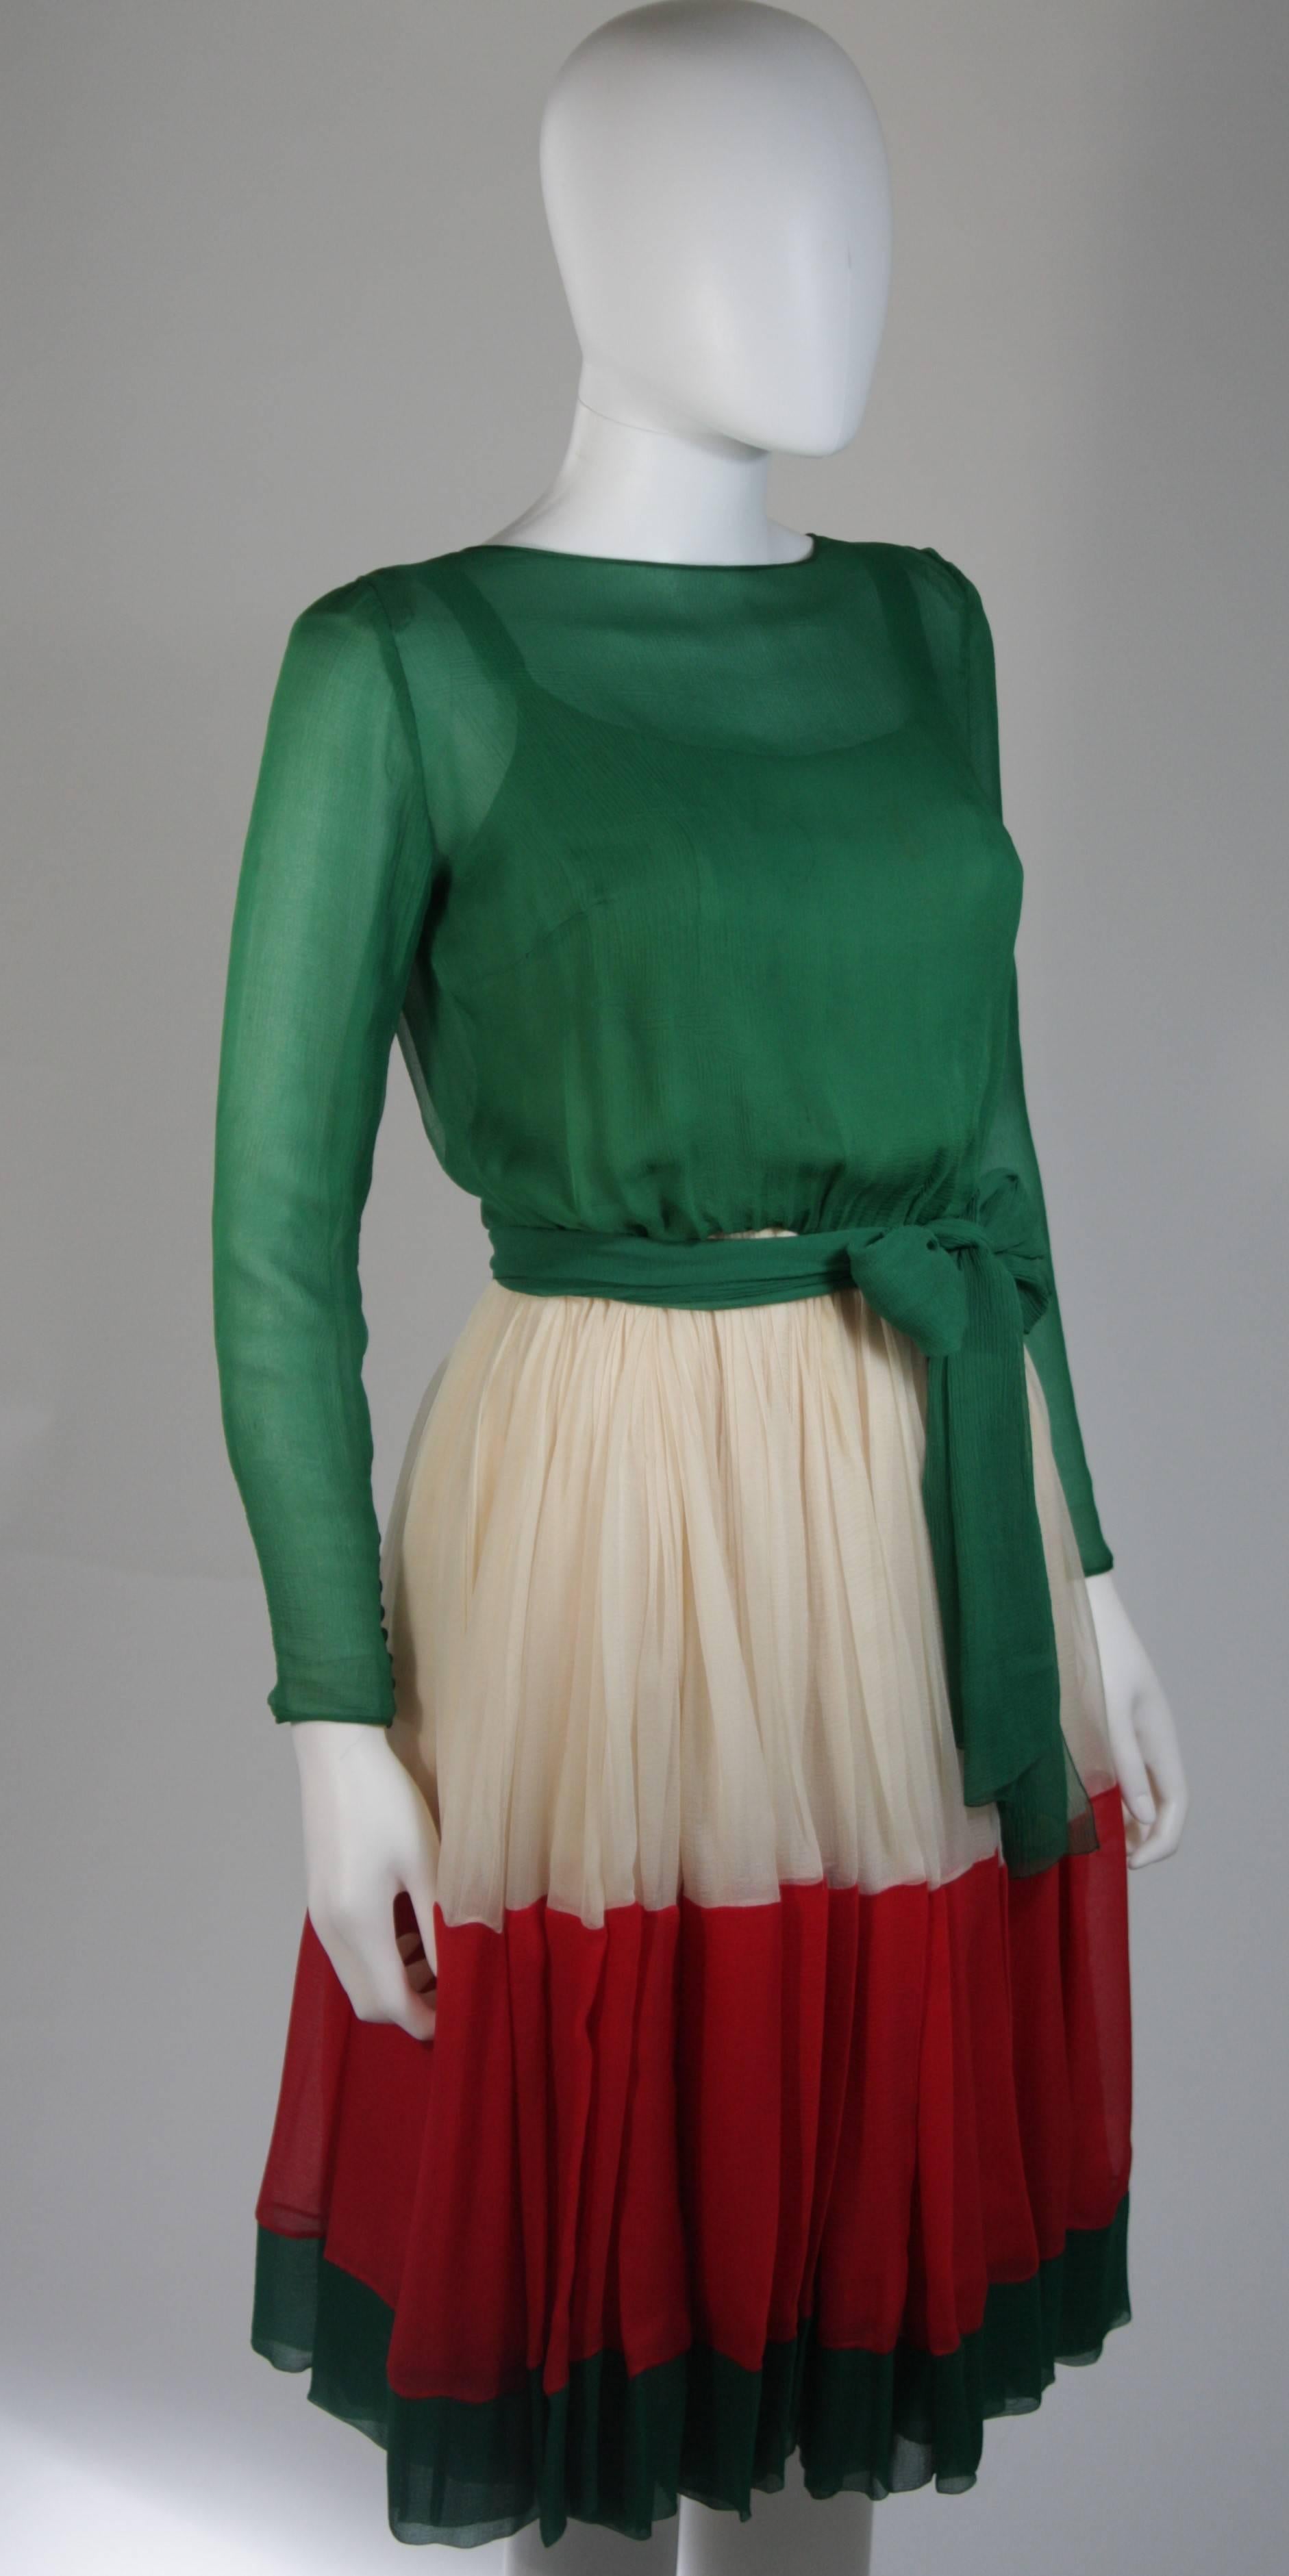 Galanos Attributed Silk Chiffon Green Red Cream Cocktail Dress Size Small Medium In Excellent Condition For Sale In Los Angeles, CA